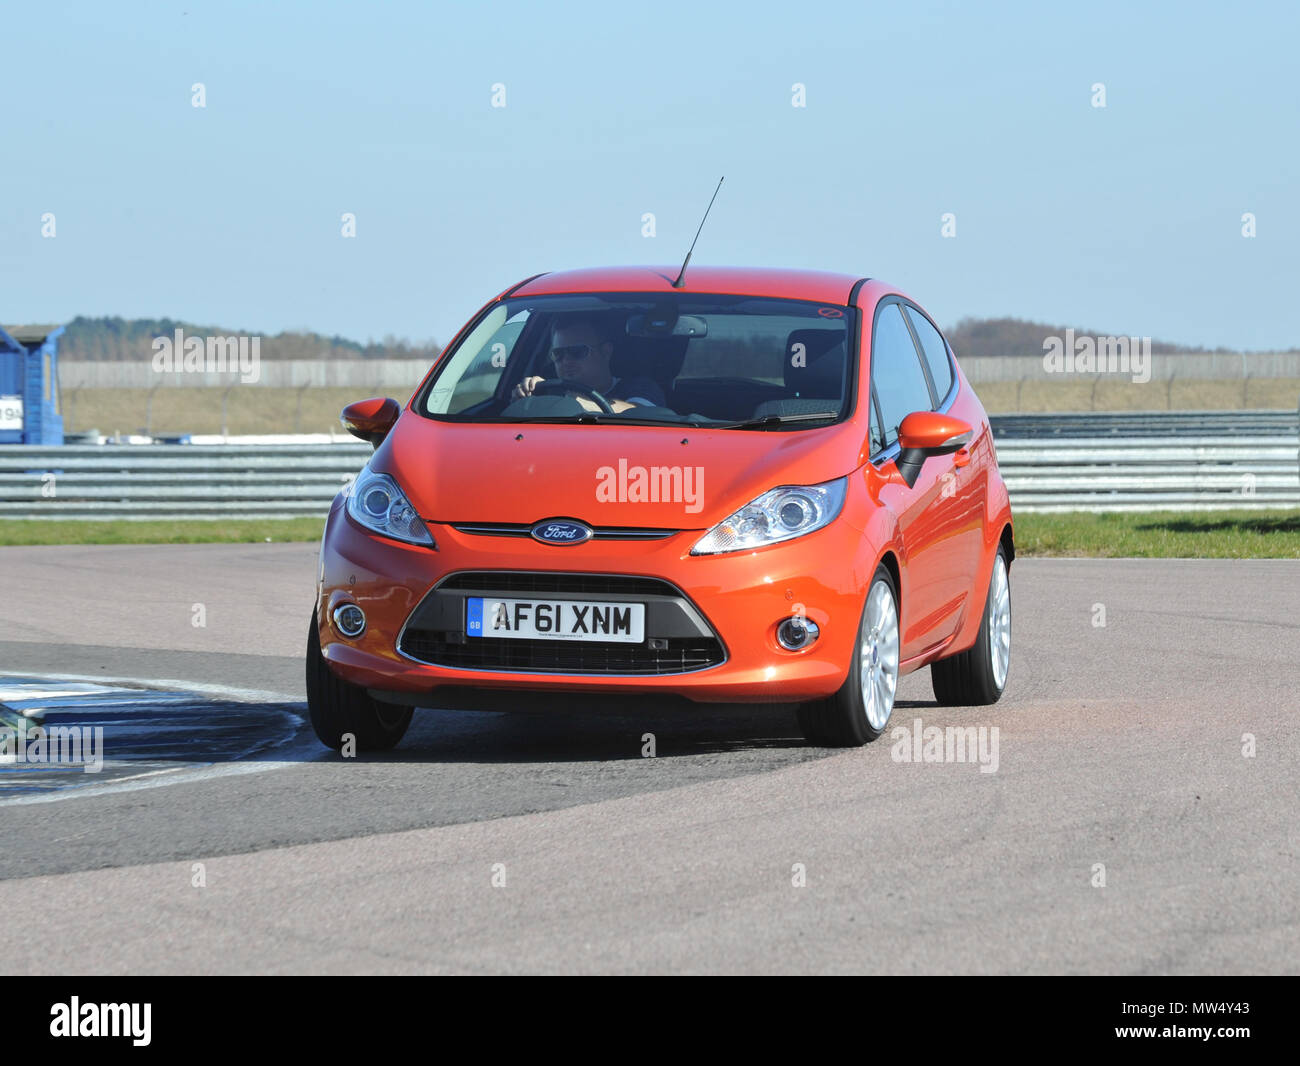 2012 Ford Fiesta car on track Stock Photo